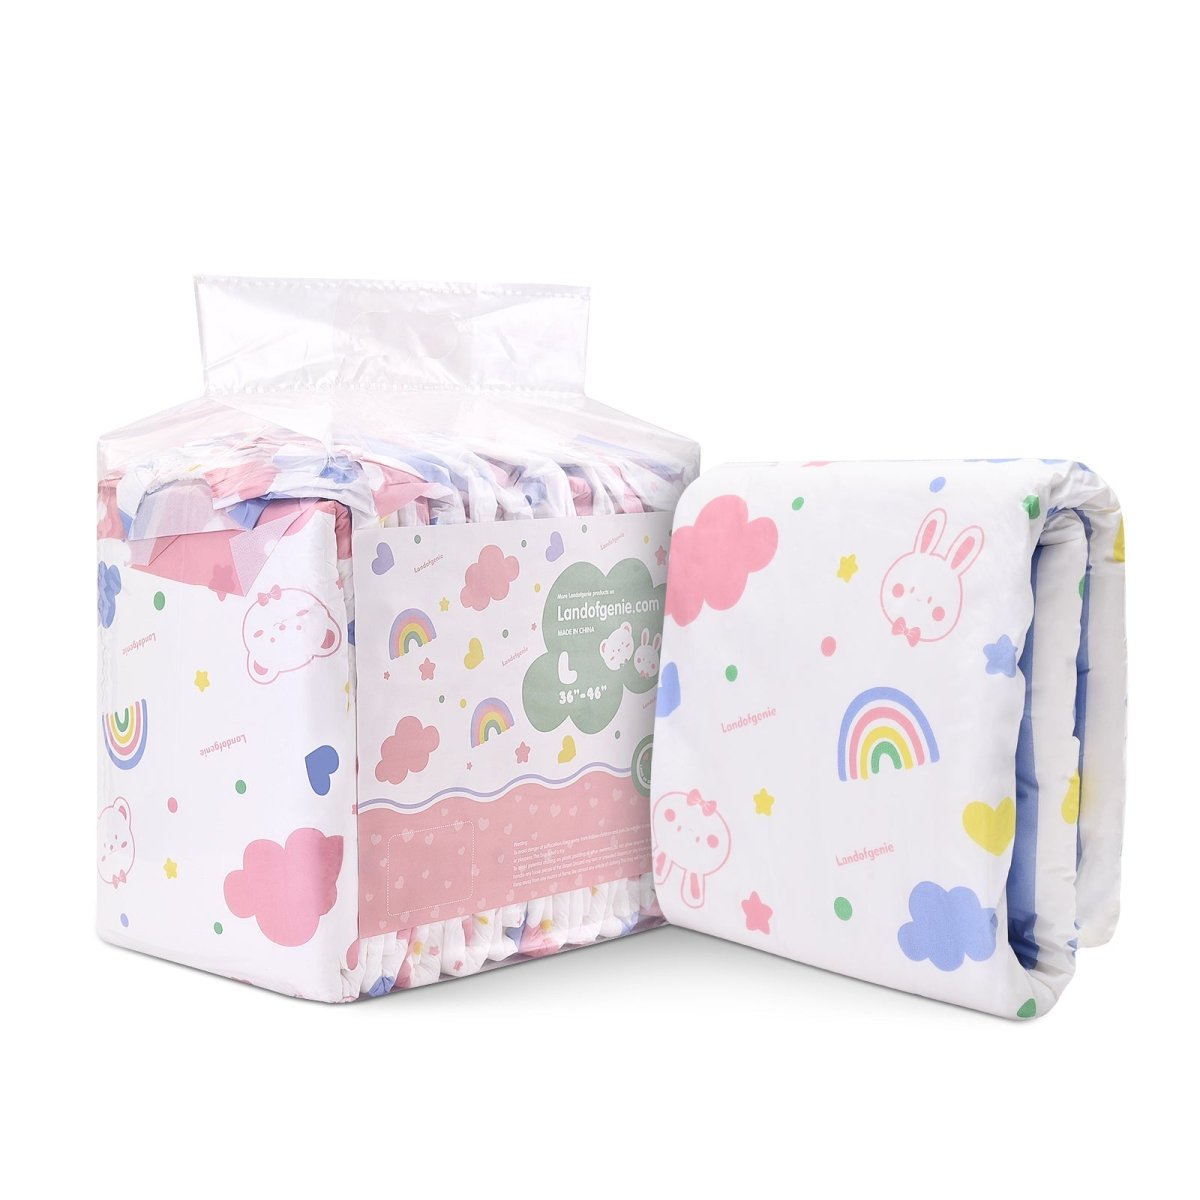 Landofgenie Adult ABDL Diapers Overnight Adult Diapers With 10 Pieces - Anime Bunny and Bear - landofgenie